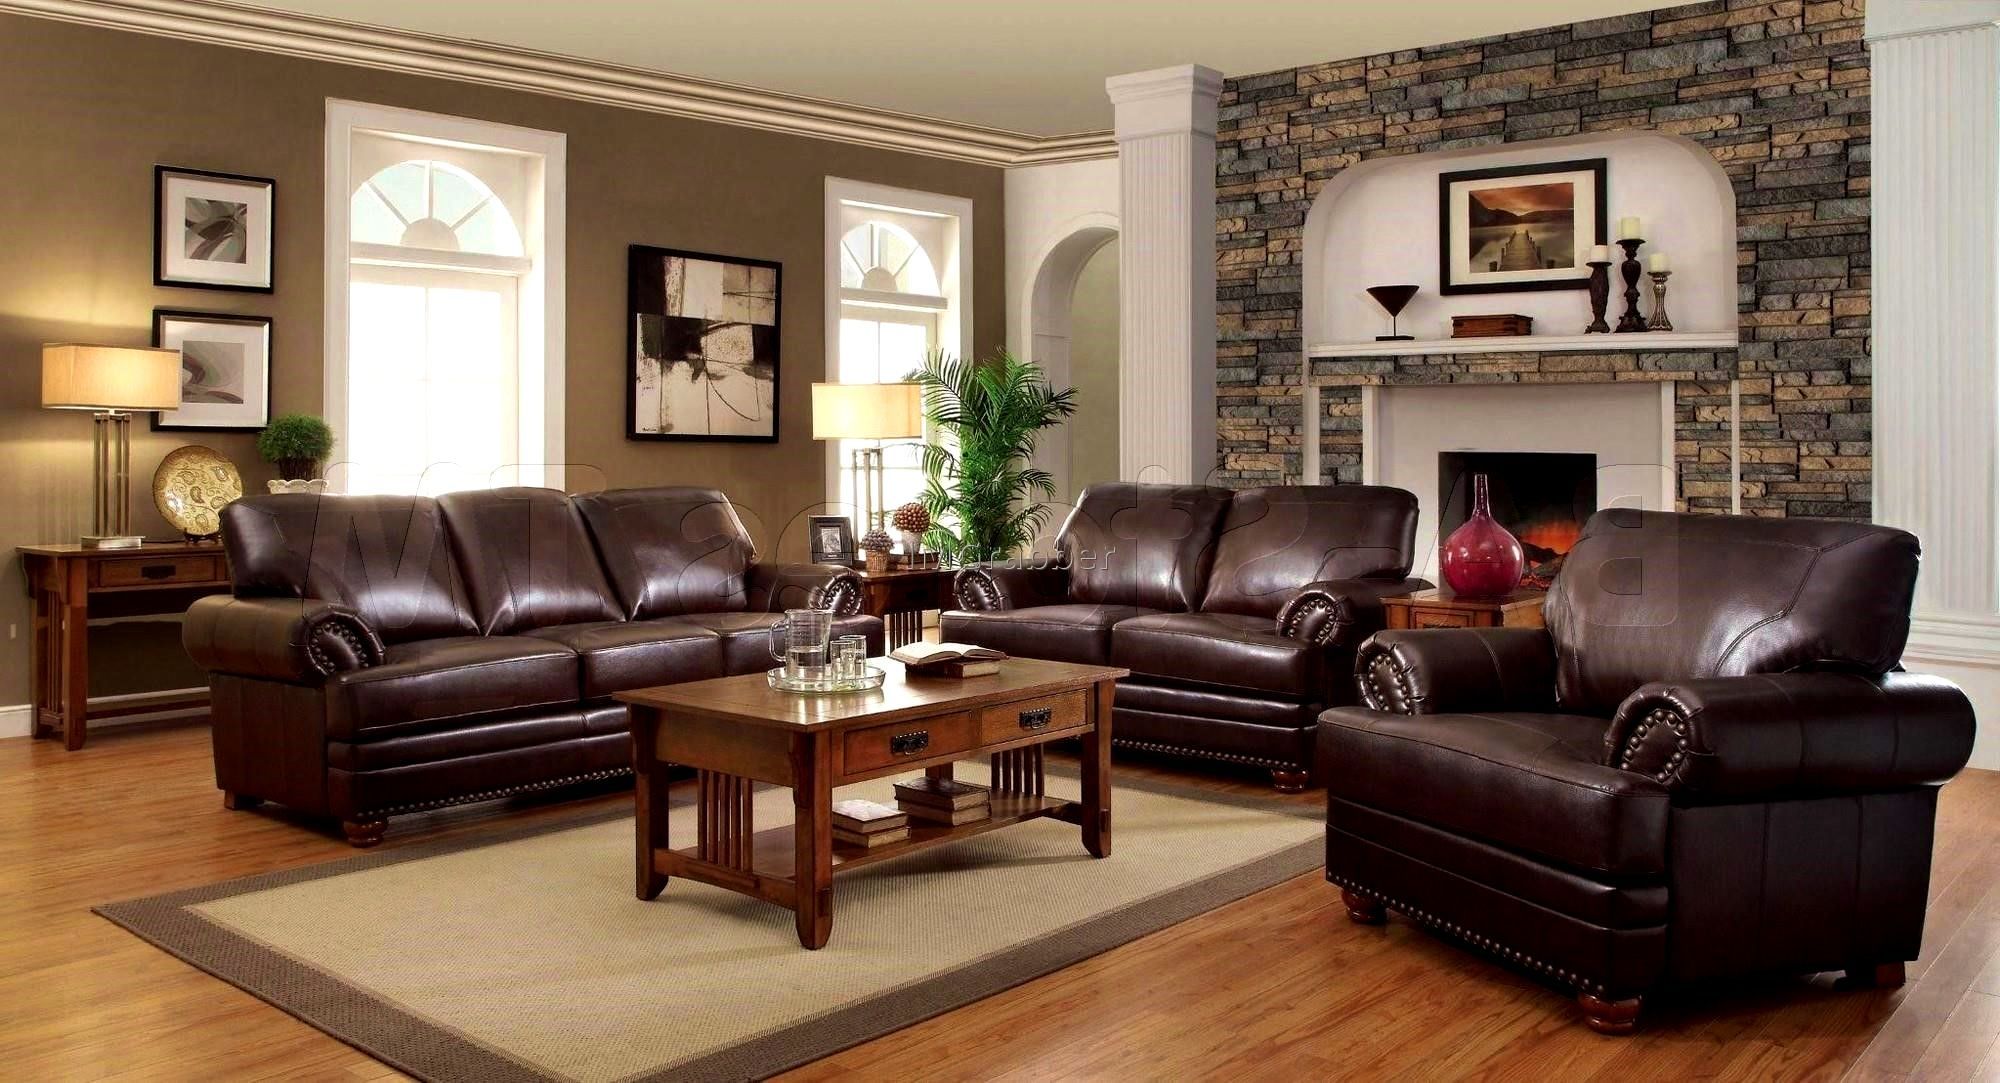 Decorating Ideas For Brown Living Room Furniture: How To Make It Look With Sofas With Ottomans In Brown (View 20 of 20)